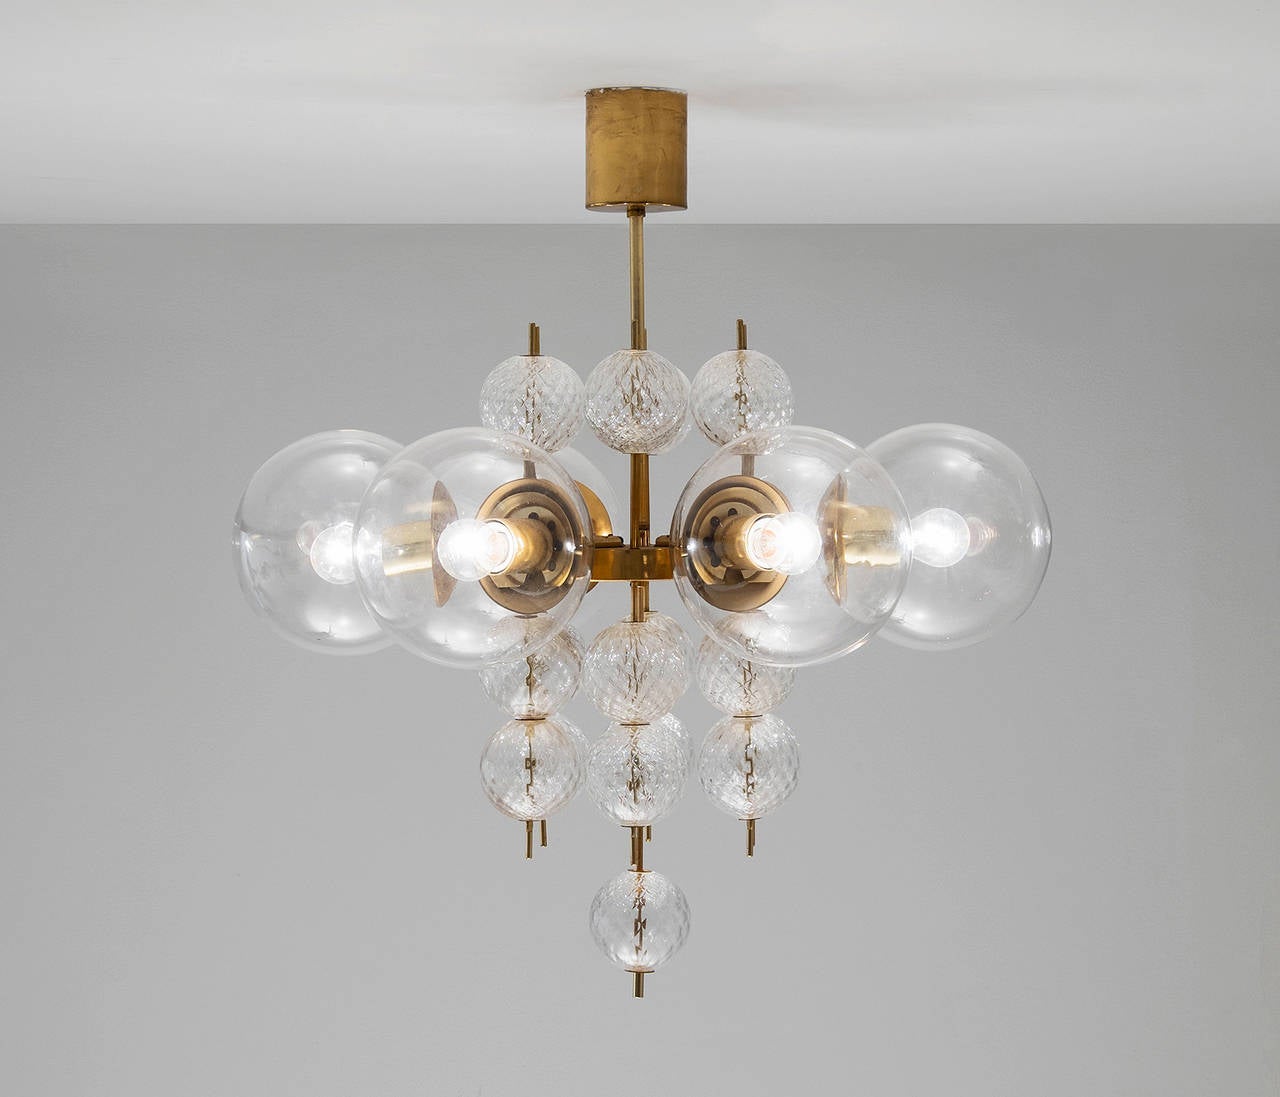 Stunning extra-large brass chandelier with beautiful glass bulbs, 1960s.

This light was found in the very south of the Czech Republic, so most likely from Austrian production seen its excellent quality with which it has been manufactured.